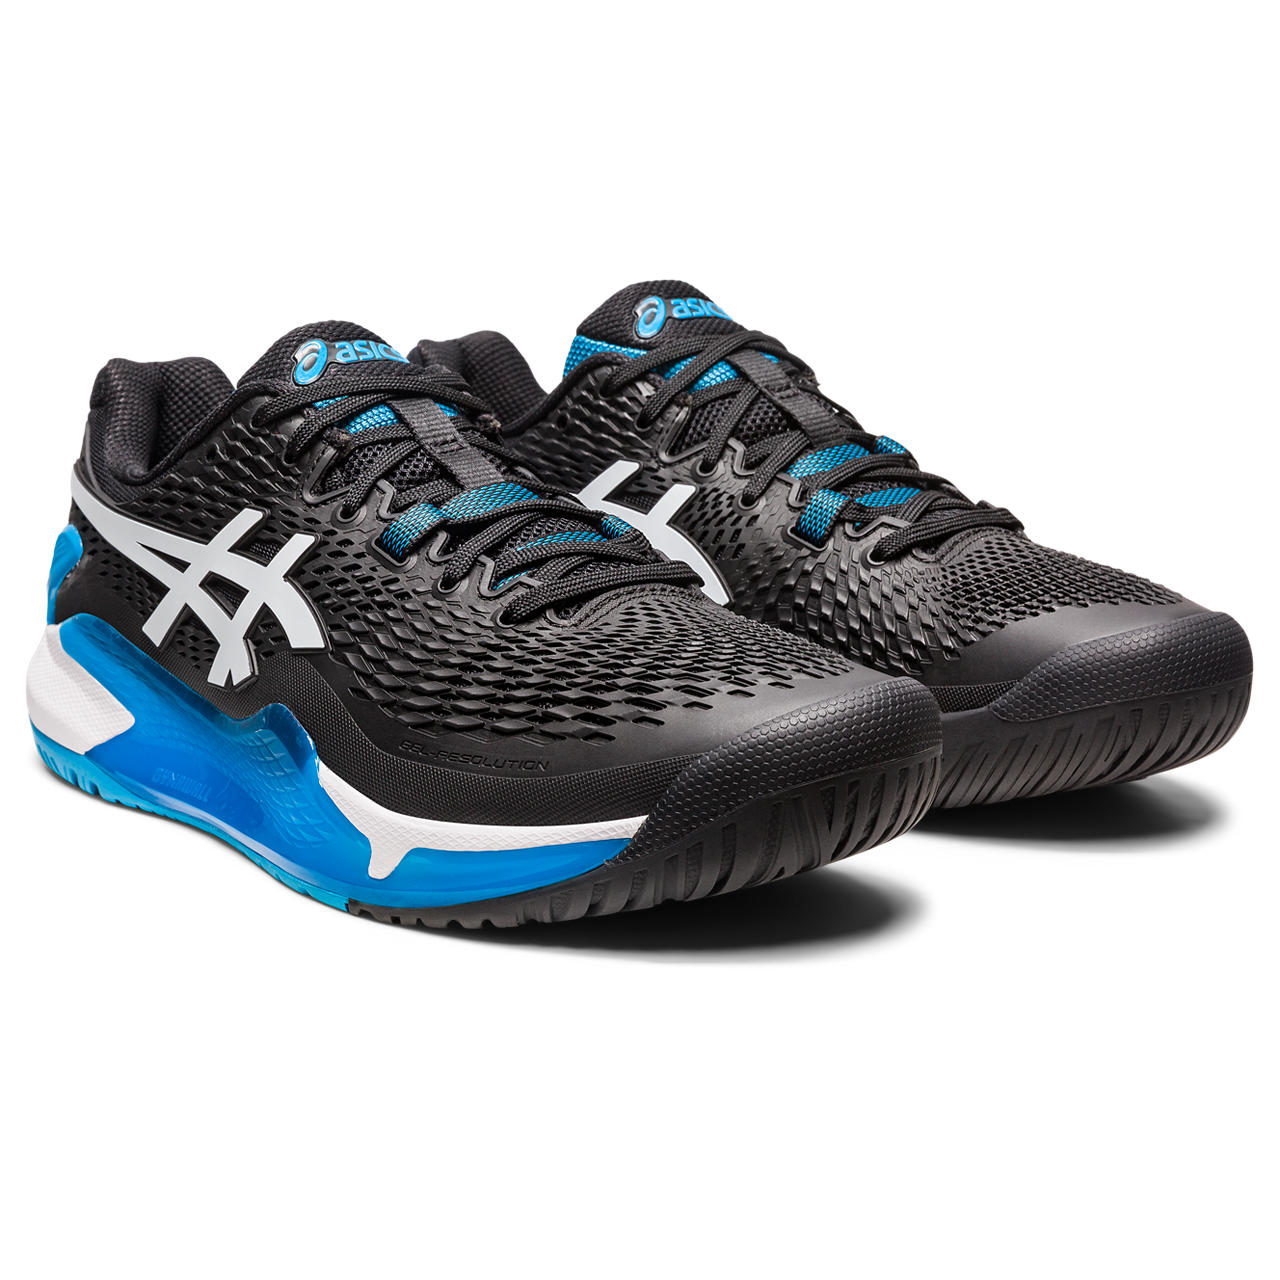 Front angle view of the ASIC Men's Resolution 9 tennis shoe in Black/White